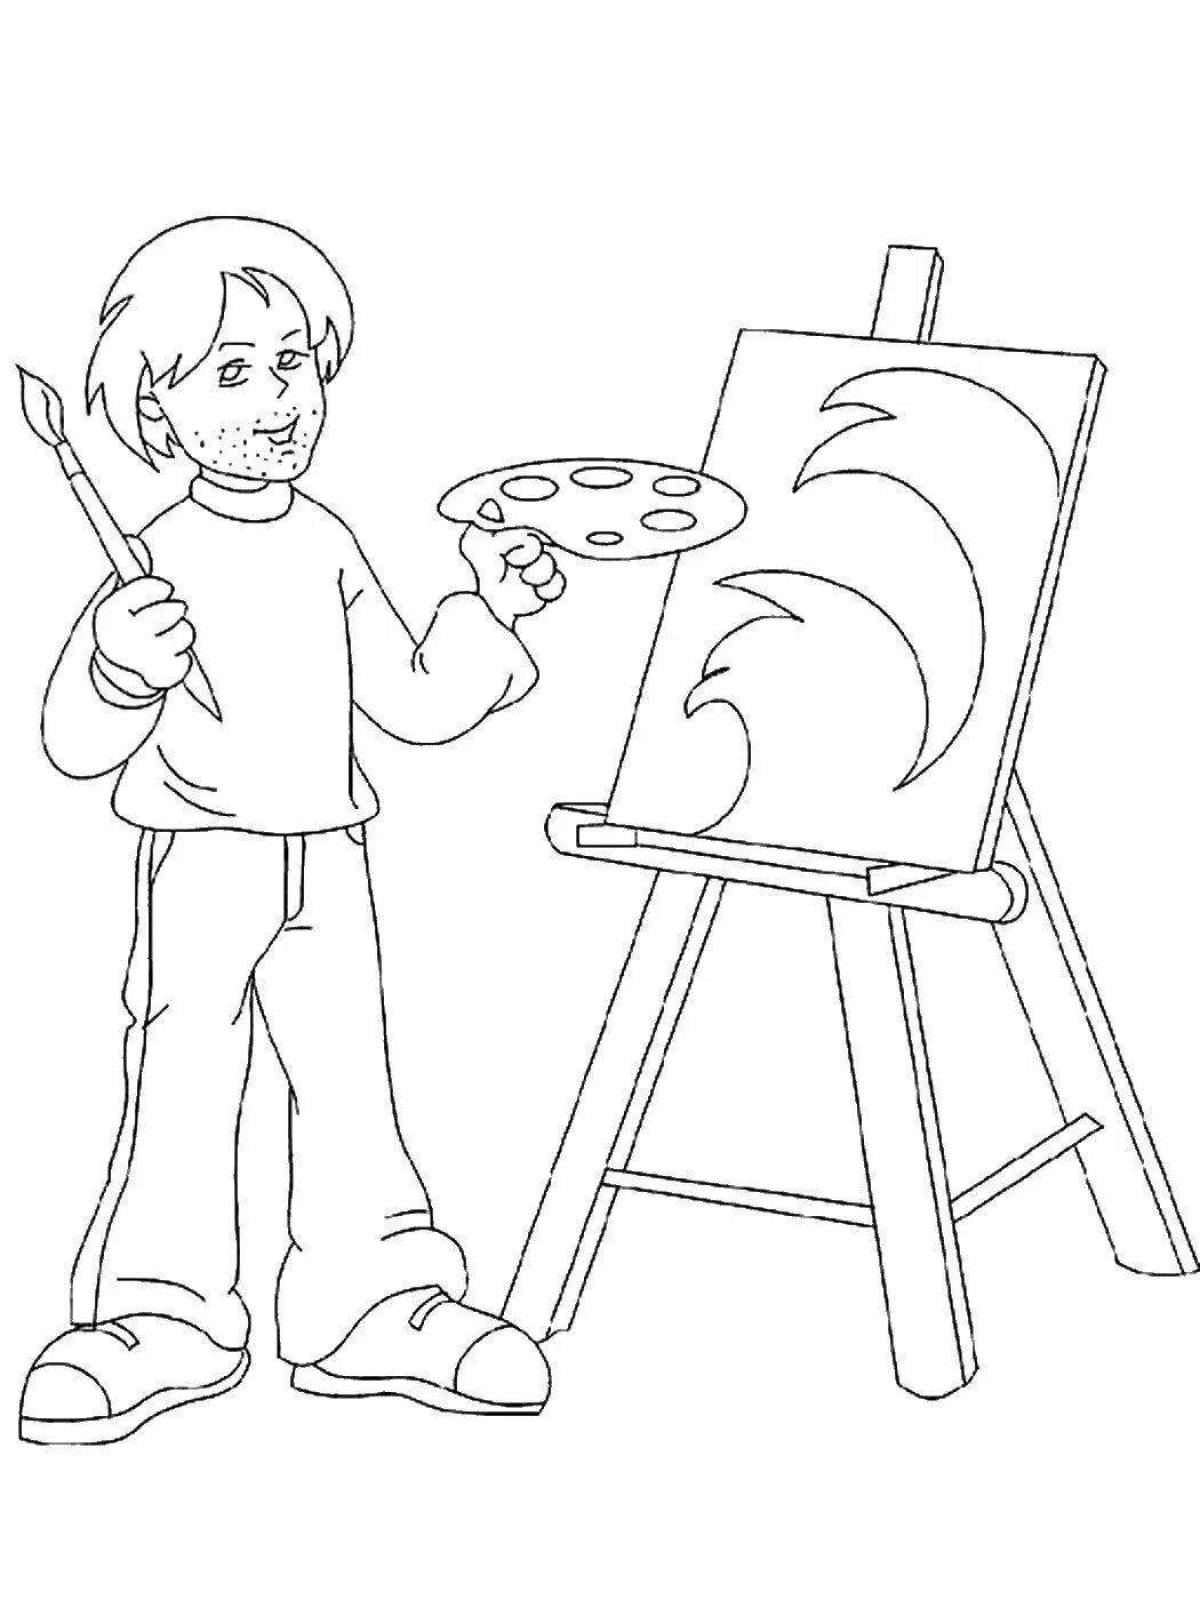 How to draw a person #13